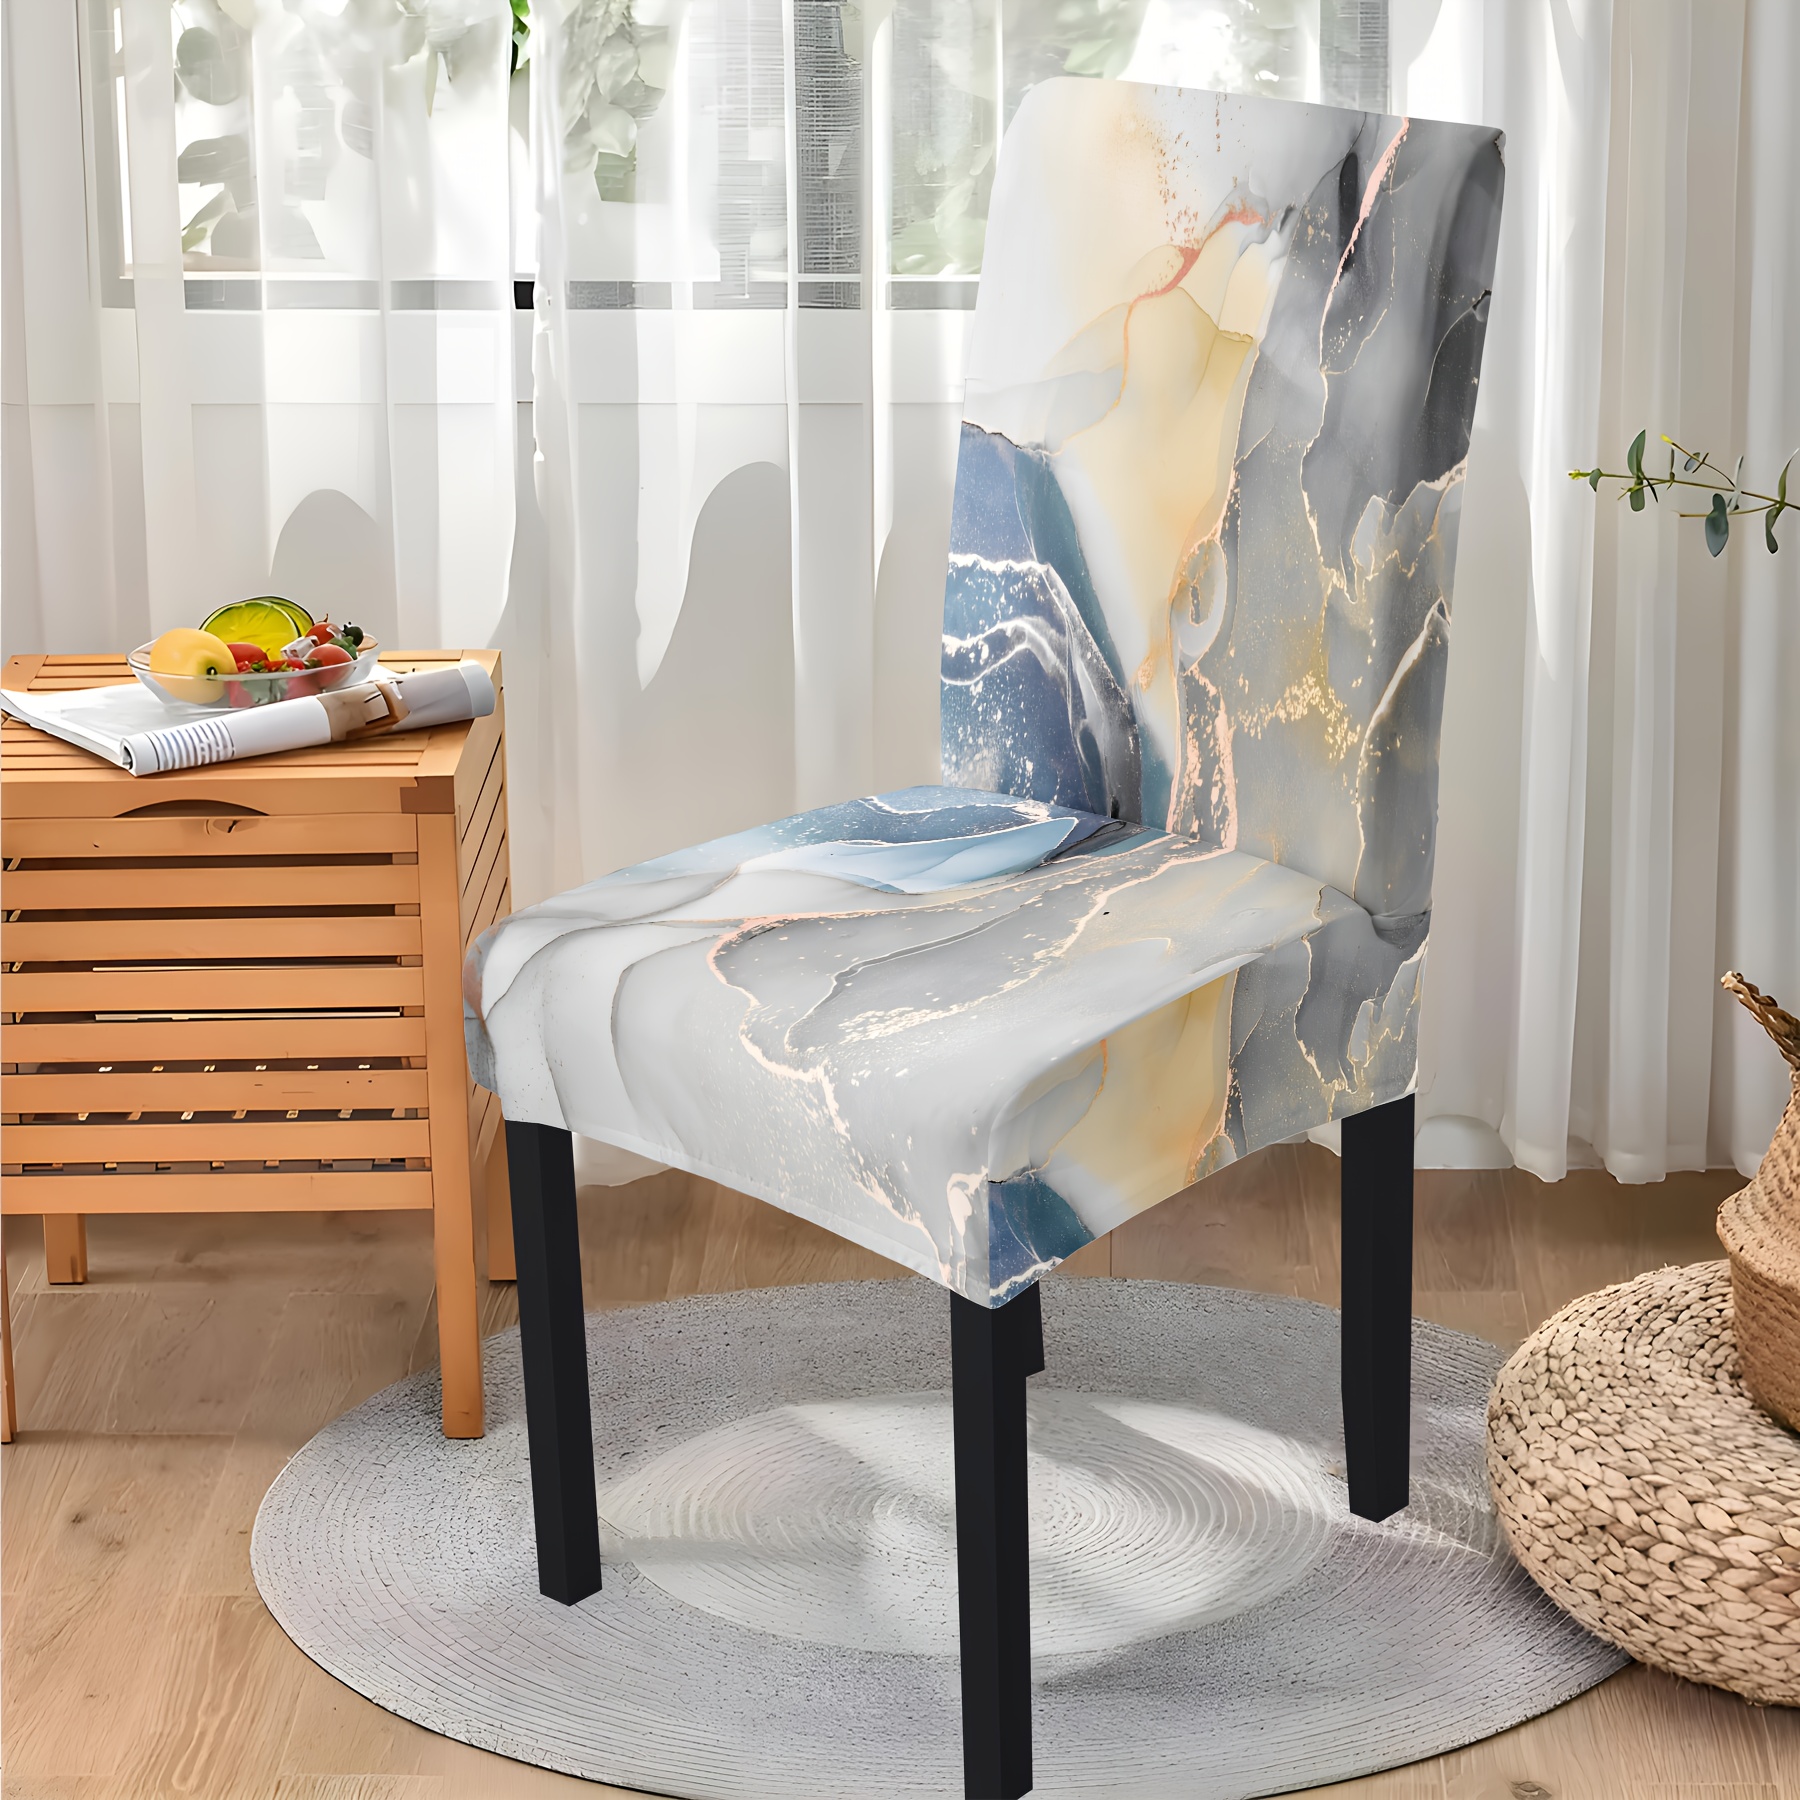 

2/4/6pcs Classic Blue-grey Marble Print Chair Covers, High Stretch Milk Silk Fabric, Washable & Colorfast, For Dining Room, Hotel, Garden Chair Decor, Dust-proof And Stain-resistant